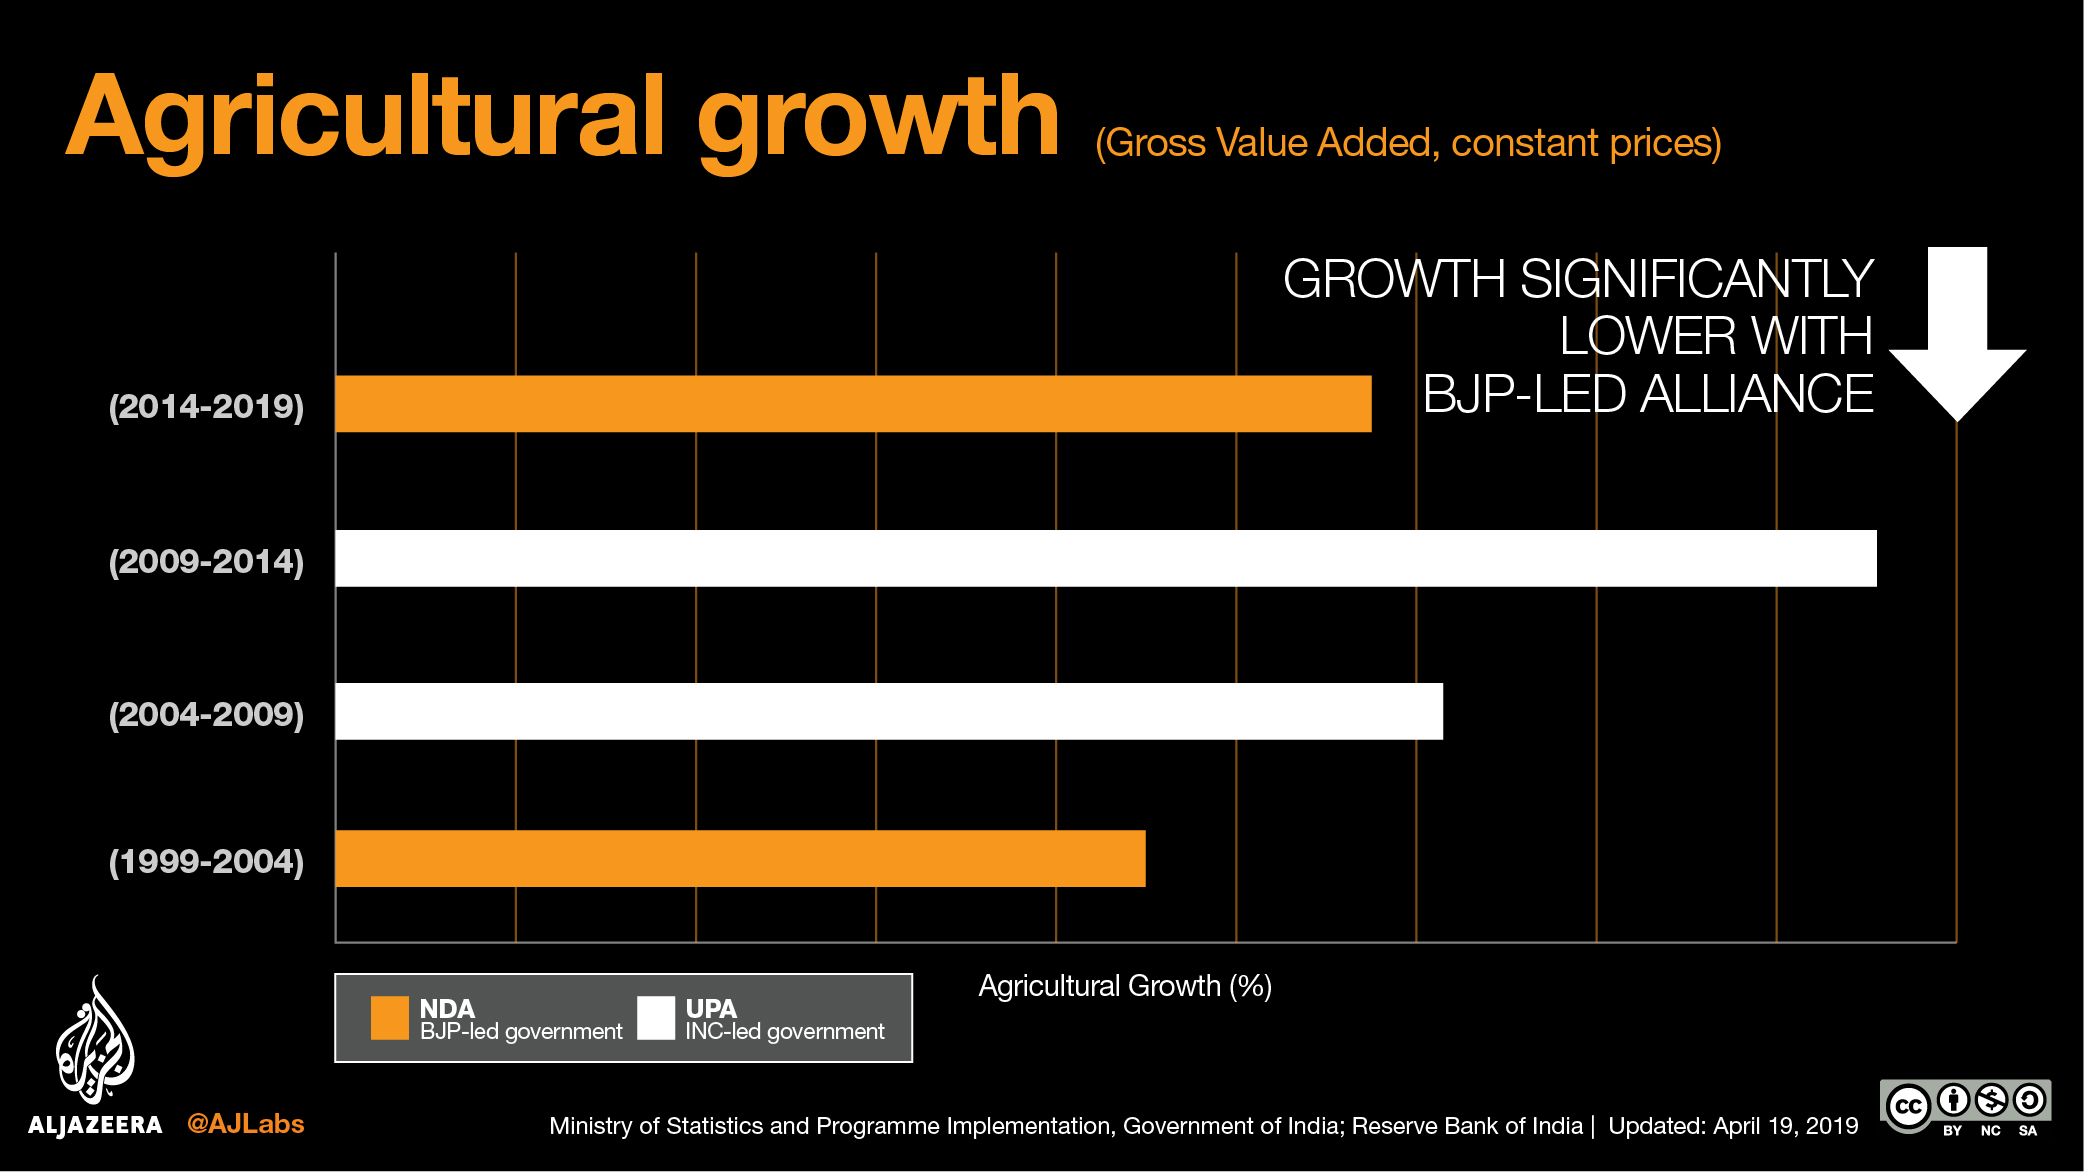 The Gross Value Added (GVA) in agriculture - an indicator of economic activity in the sector, at constant prices - grew at an average of 2.8 percent in 2014-2019, when the BJP-led National Democratic Alliance (NDA) was in power. This was significantly lower than the growth rate during the two successive terms of the Indian National Congress-led United Progressive Alliance governments, UPA1 (2004-2009) and UPA2 (2009-2014)